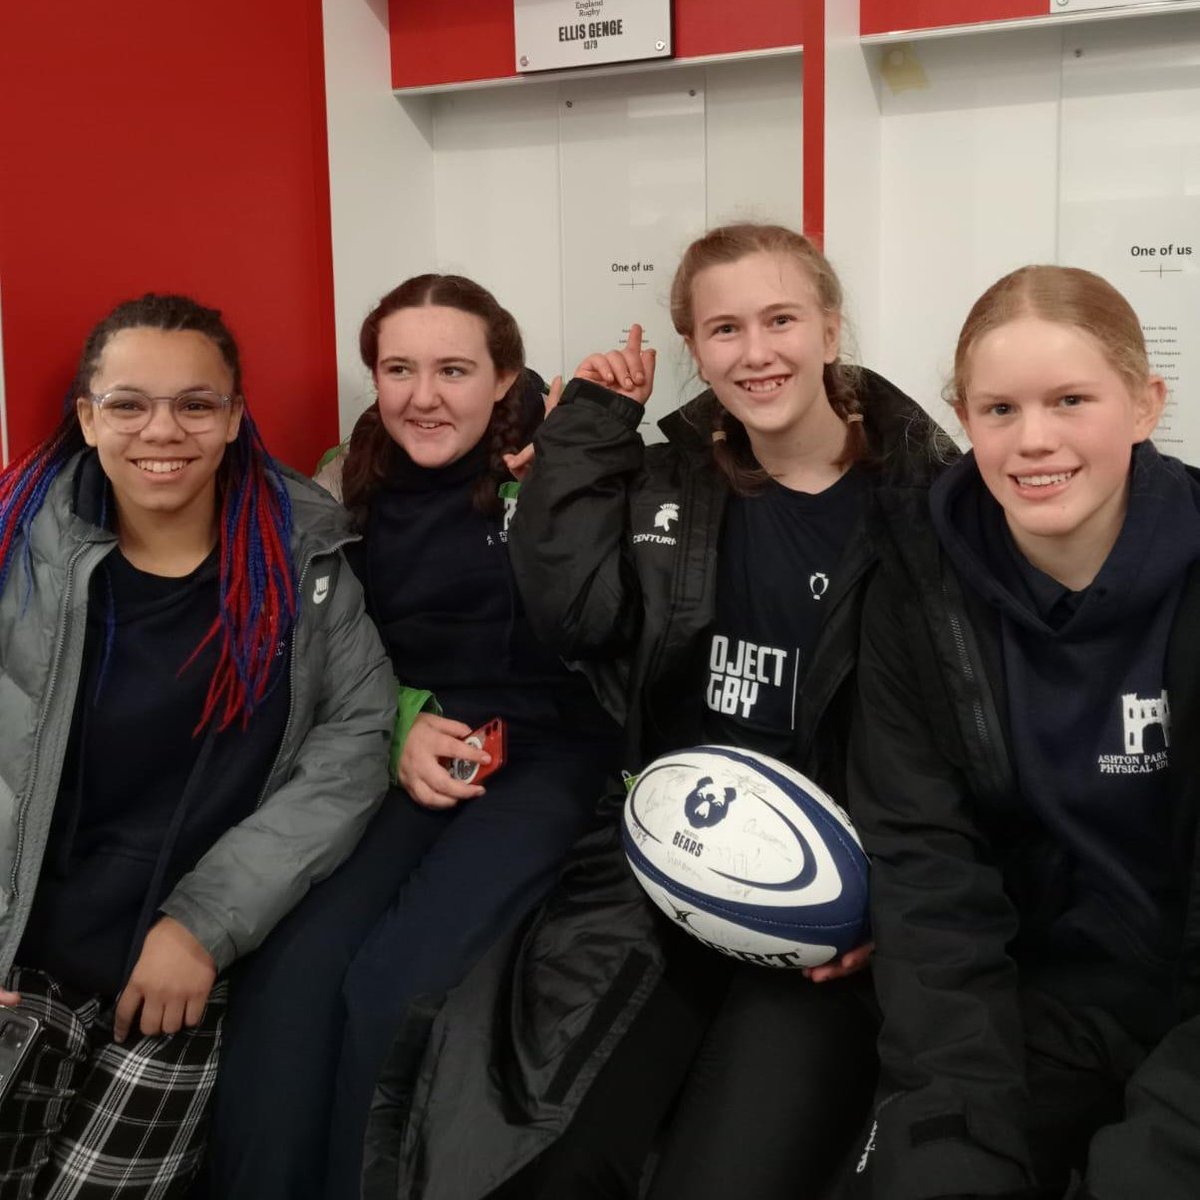 We were at HQ last week for the #ProjectRugby 1⃣0⃣0⃣,0⃣0⃣0⃣ participant festival 🏟️ Thank you to @aps_pe, @oabrislington and @st_berns for supporting and allowing us to take 🔟 amazing girls for a brilliant experience 💫 Played some pretty good rugby in the ☔️ as well! 🐻